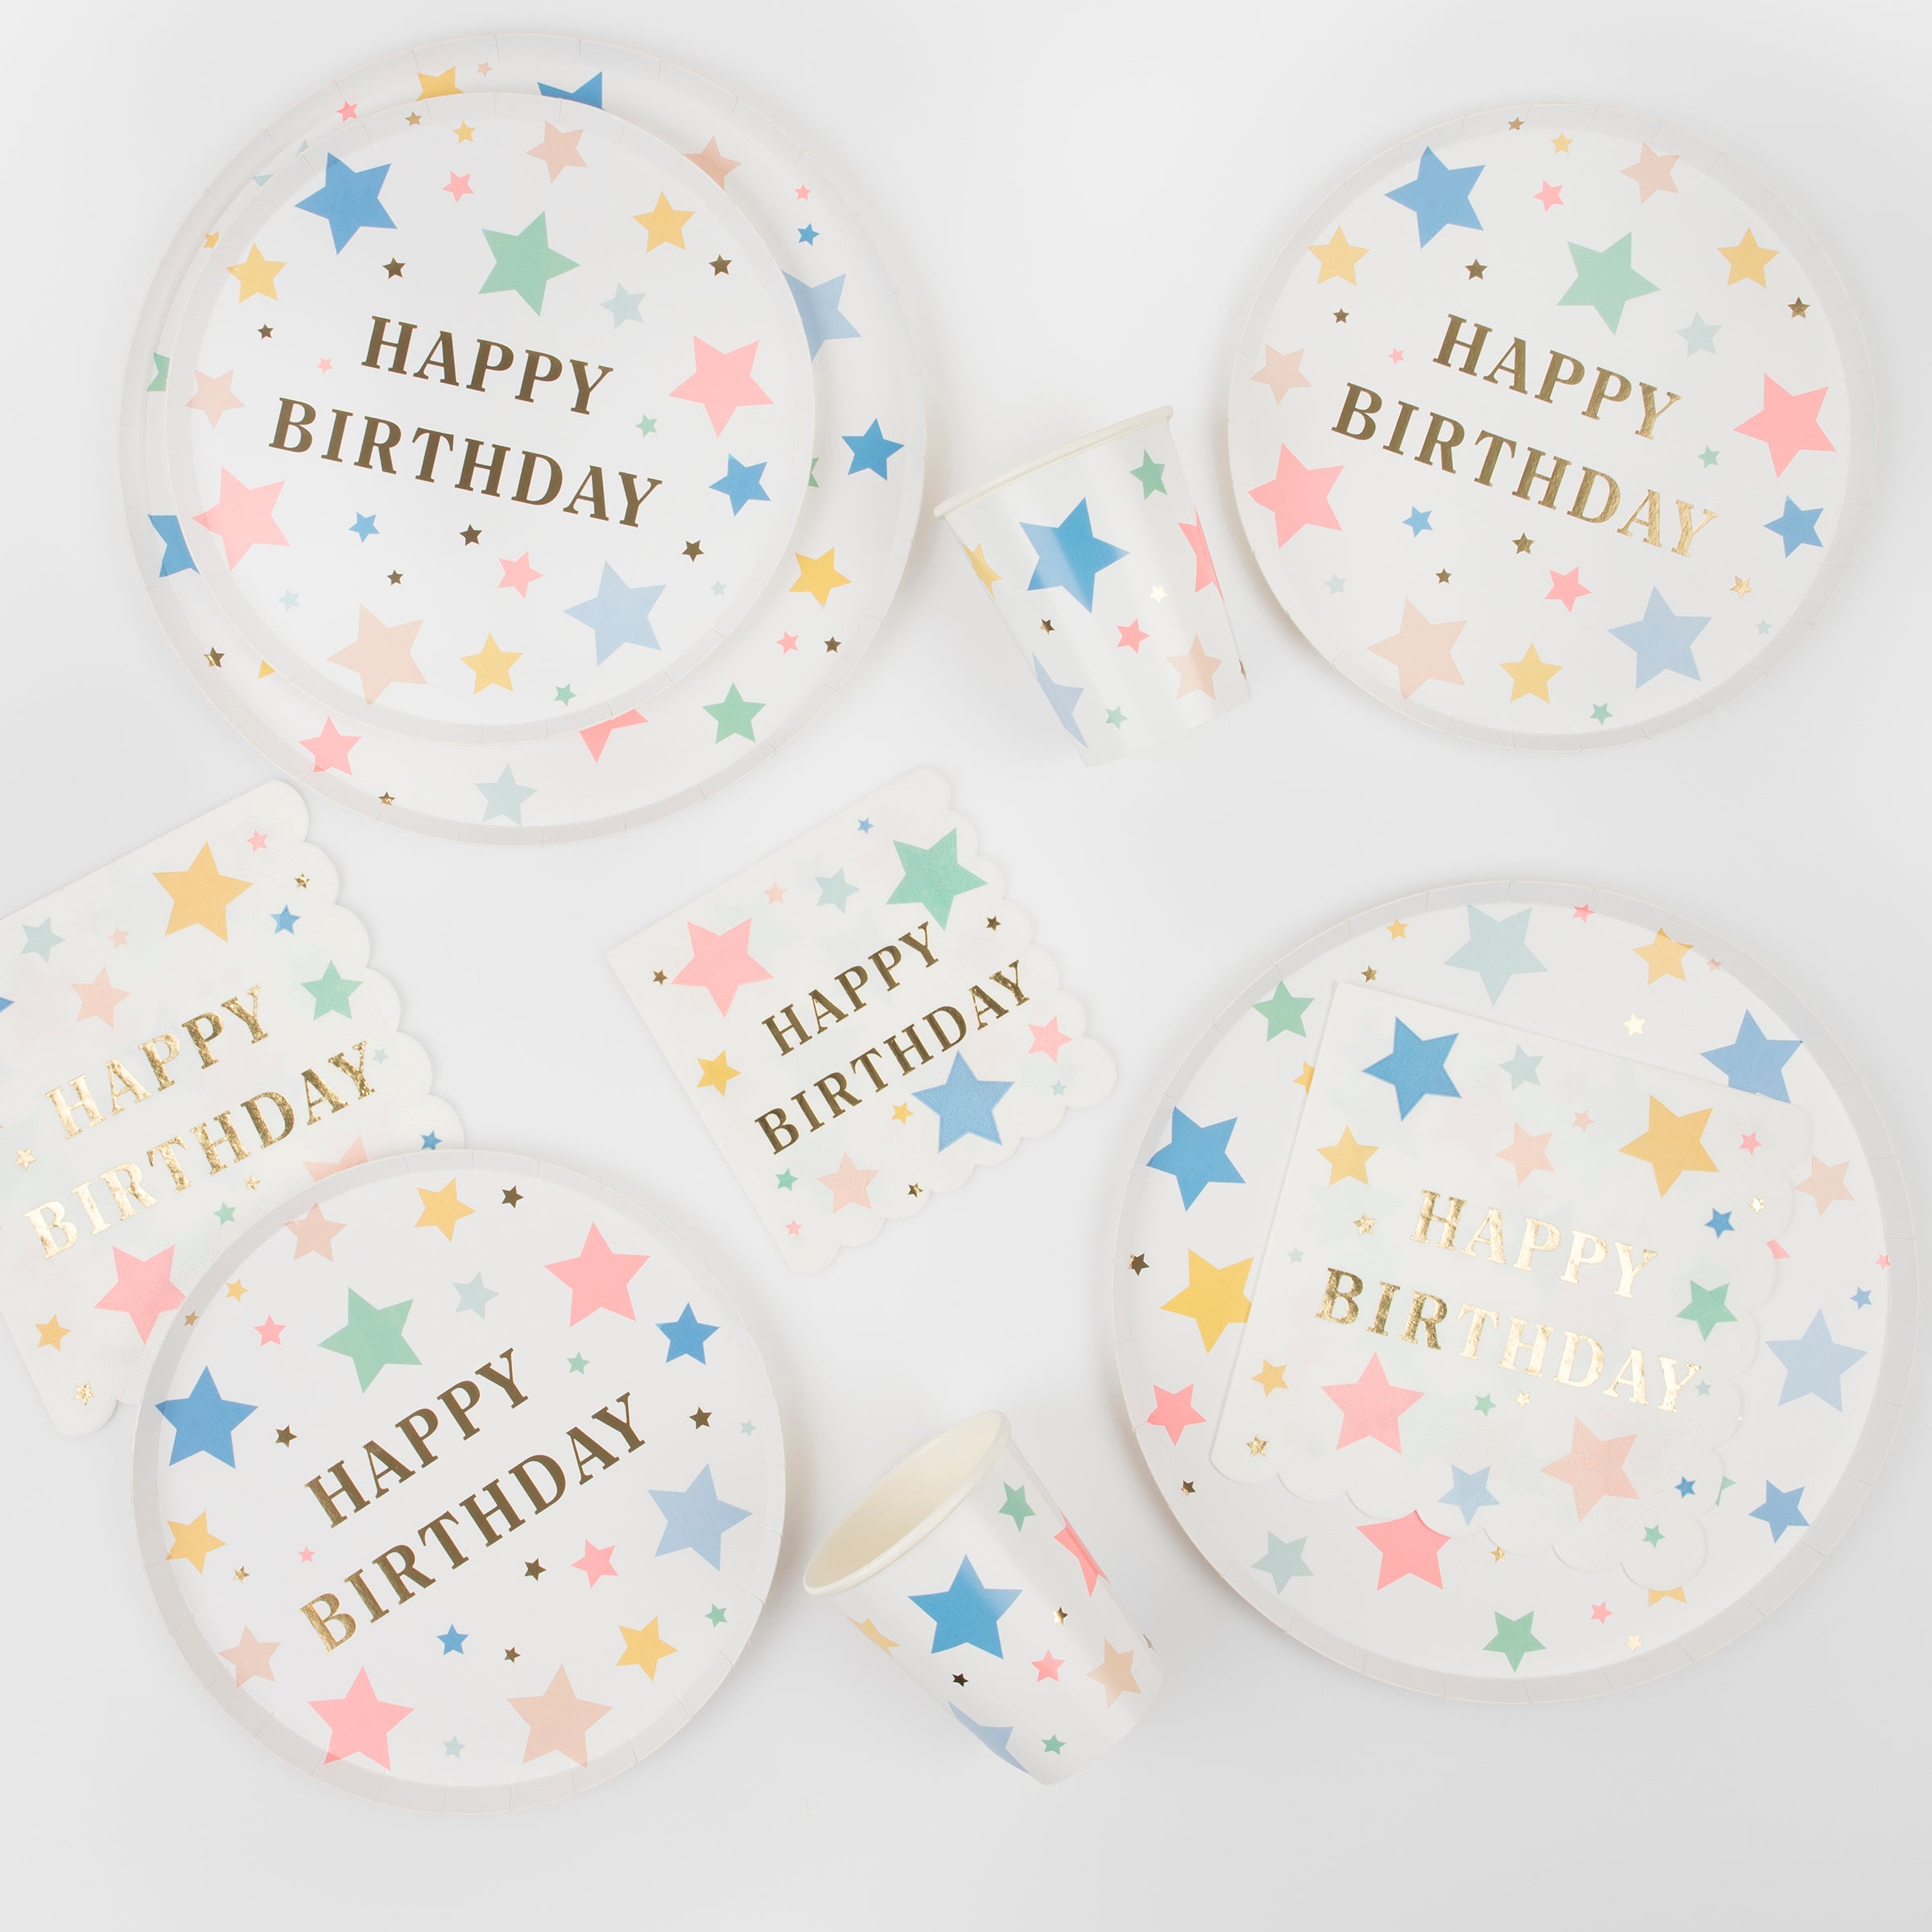 Our paper cups have colourful stars and shiny gold foil, ideal to add to your birthday party supplies.